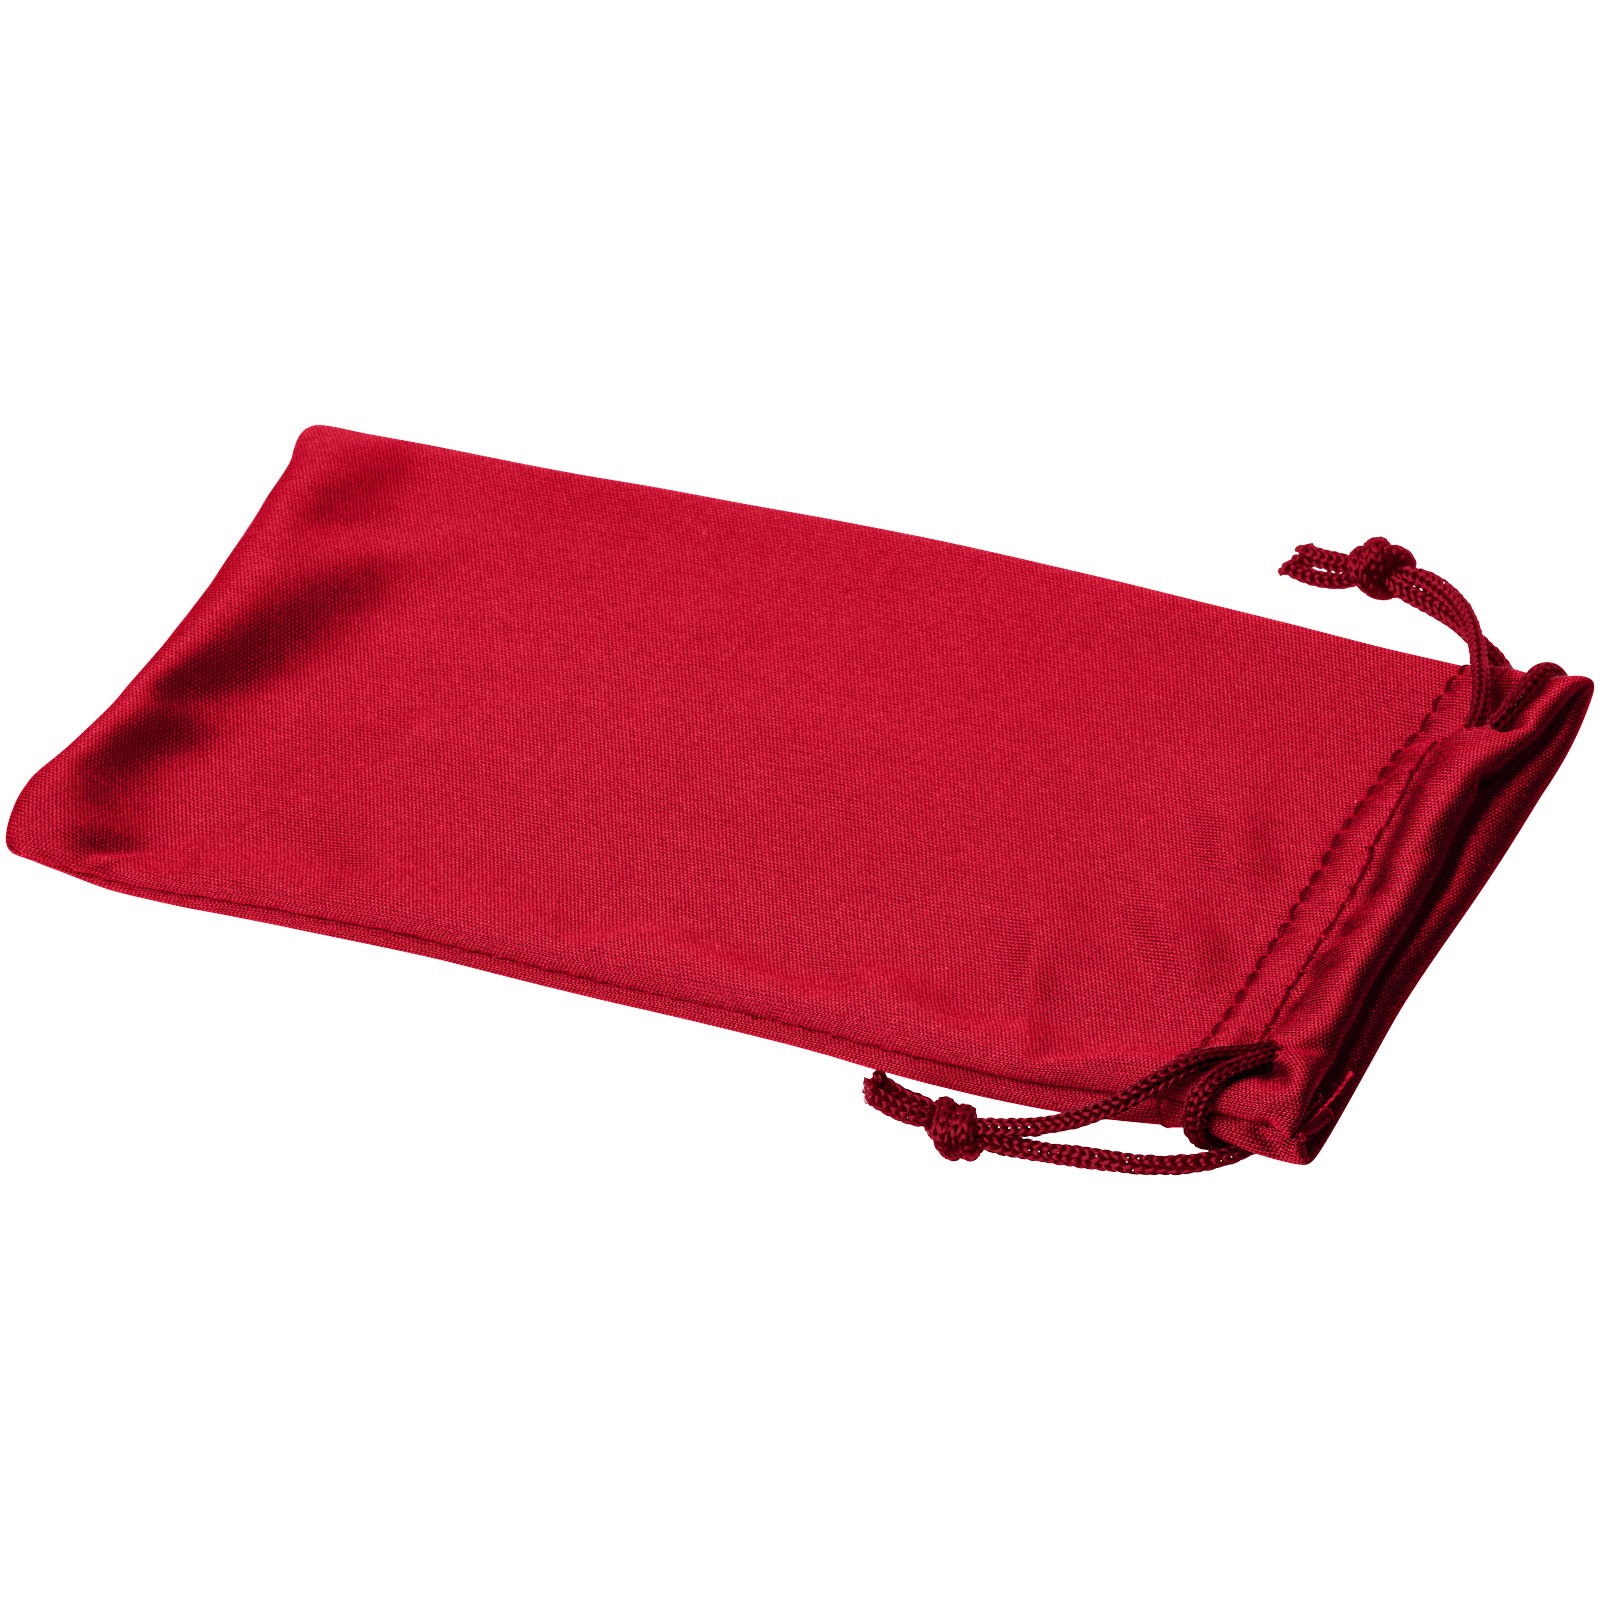 Clean microfibre pouch for sunglasses - Red